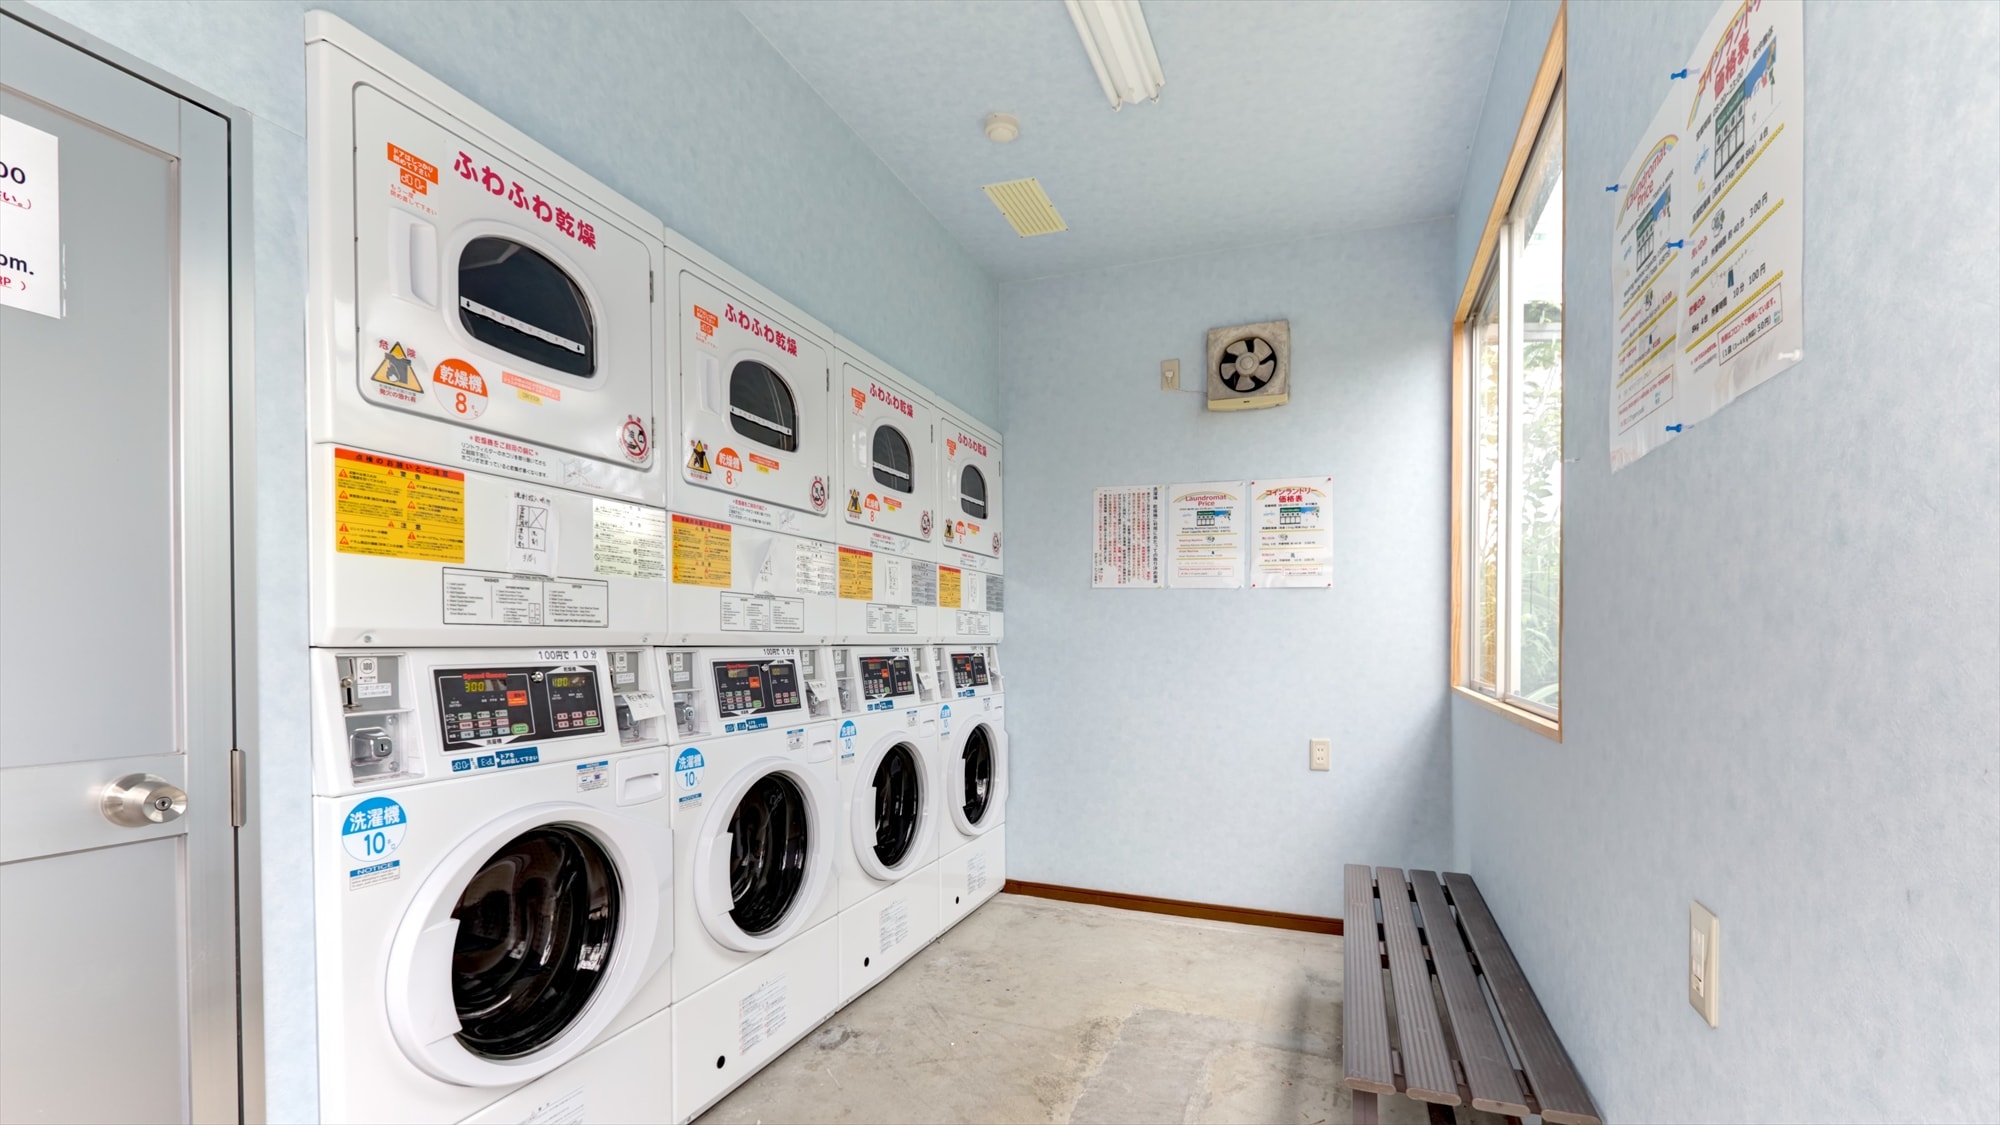 ◇ There is a coin laundry on the premises (available 24 hours, paid)